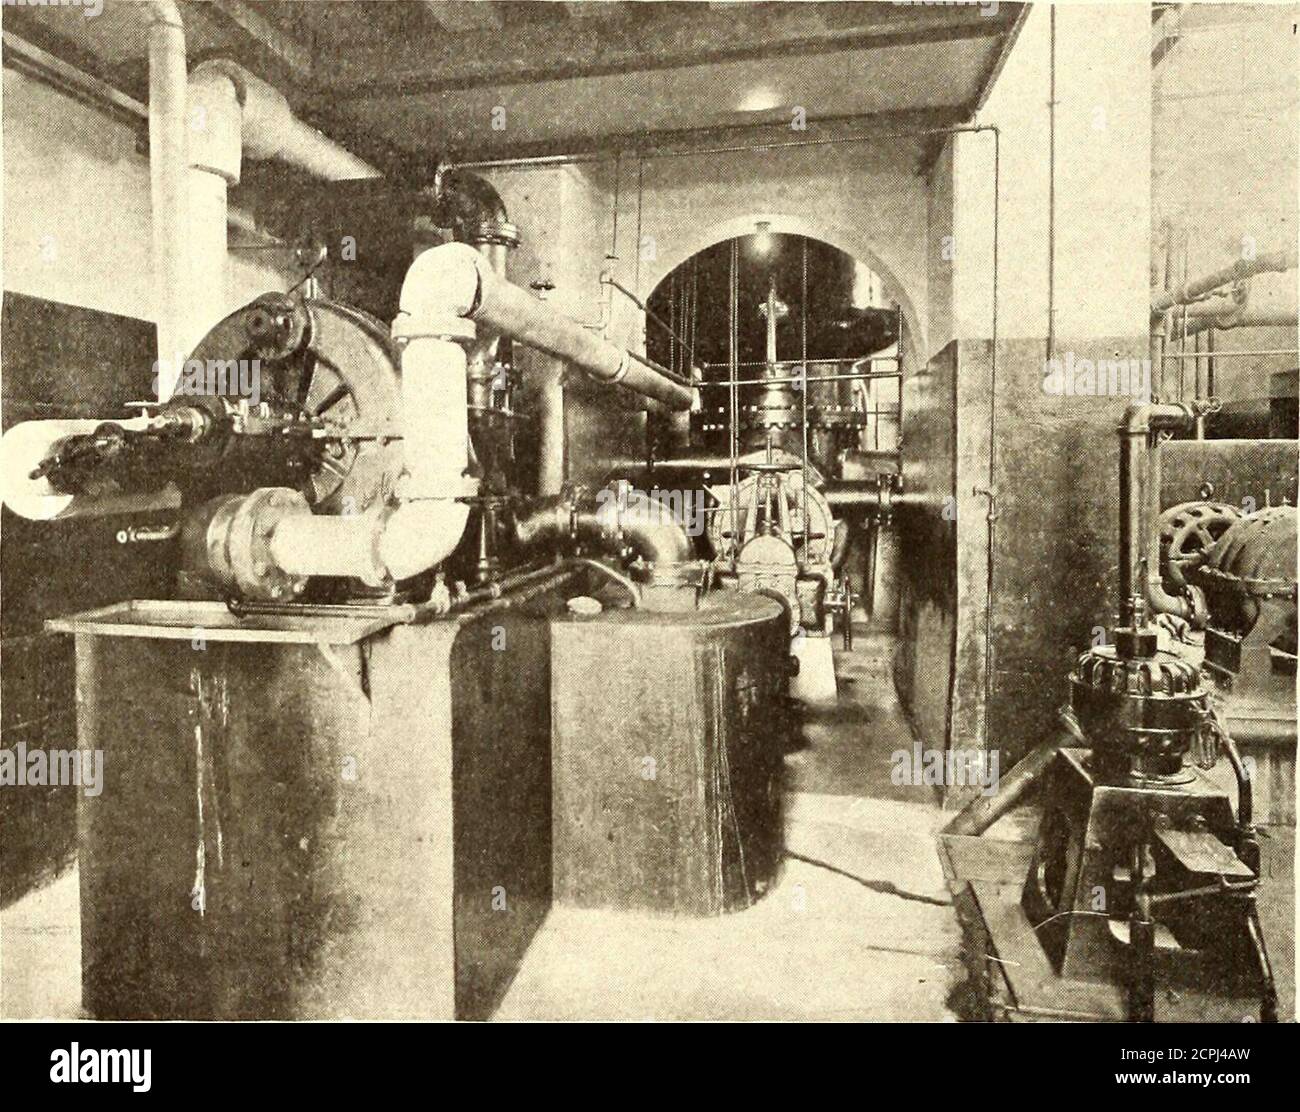 . Electric railway journal . x 15 in. The boilers are ordinarily operated banked, thesteam pressure in four being kept at 150 lb., one being runat from 100 to 125 lb., and the sixth without fires. Thedraft gages are of the Ellison differential type. The feedwater is admitted to the boilers at a temperature of from200 to 210 deg. Fah. ENGINE ROOM The operating room of the station is about 24 ft. wide x67 ft. long, and is divided into a raised section containingan 8000-kva Westinghouse-Parsons 4400-volt, three-phase, revolving field turbo-alternator, operating at 1800r.p.m., and a lower bay or a Stock Photo